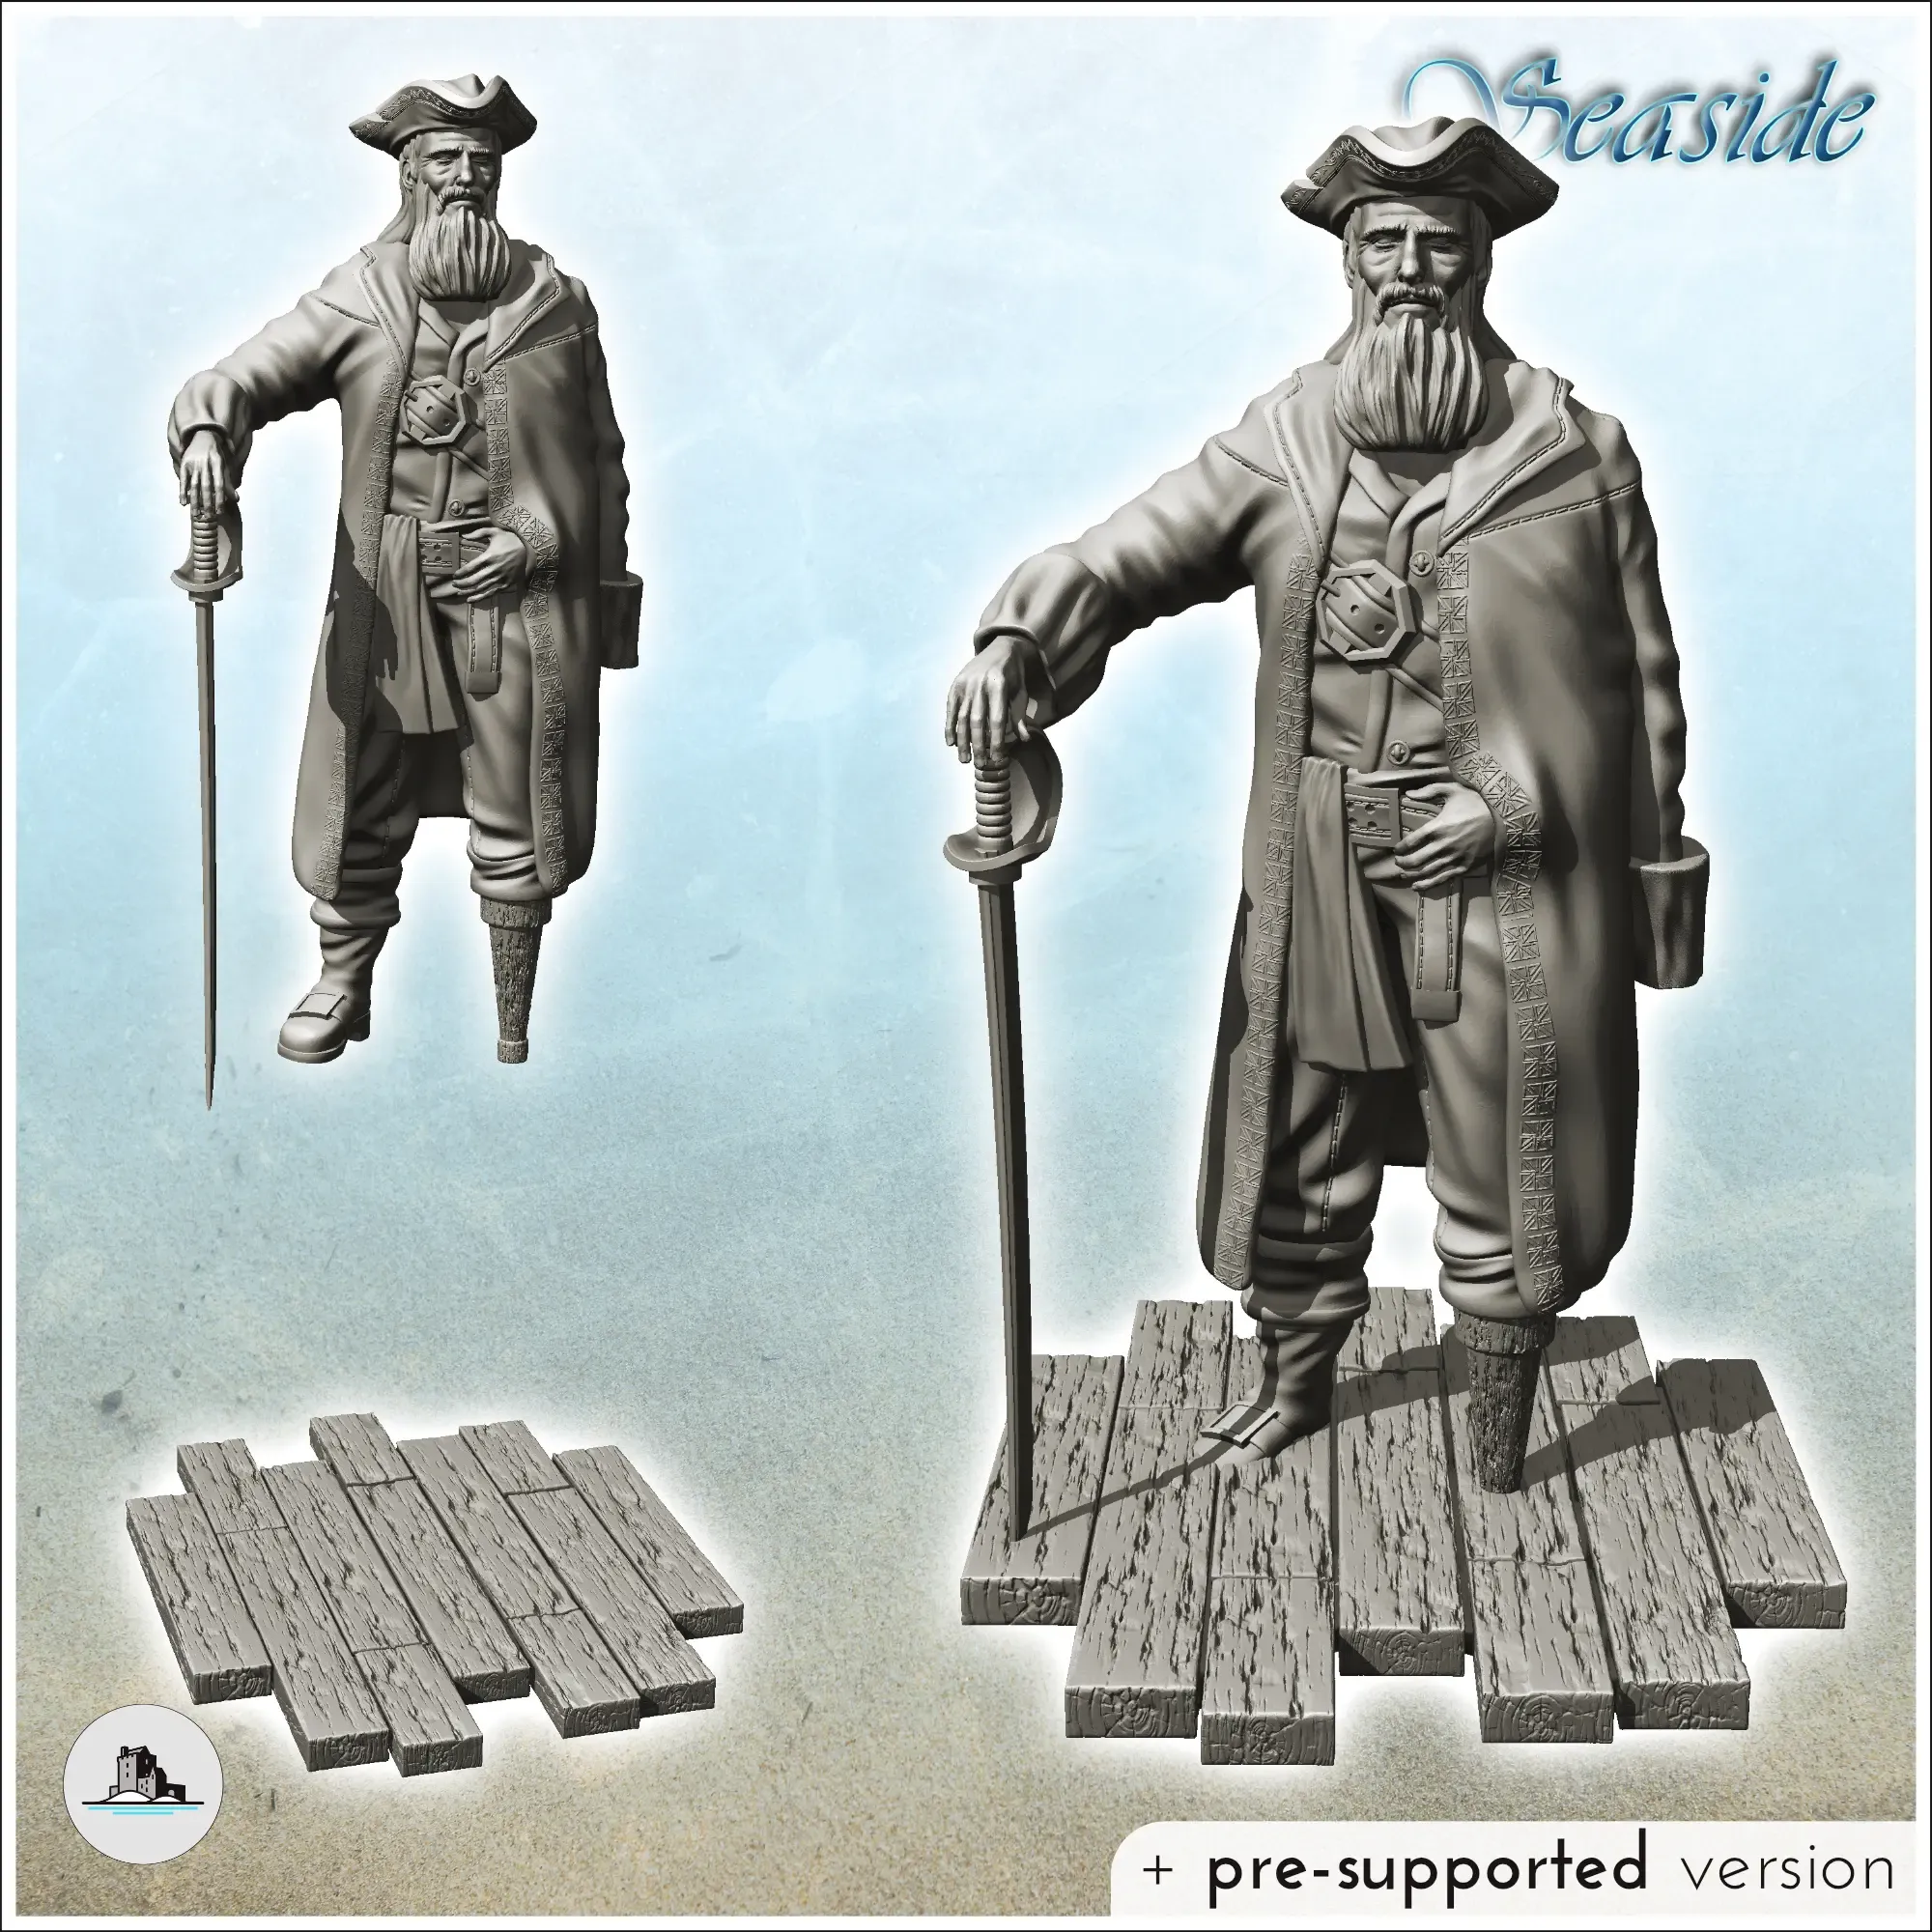 Bearded and one-armed pirate captain with wooden leg - mini